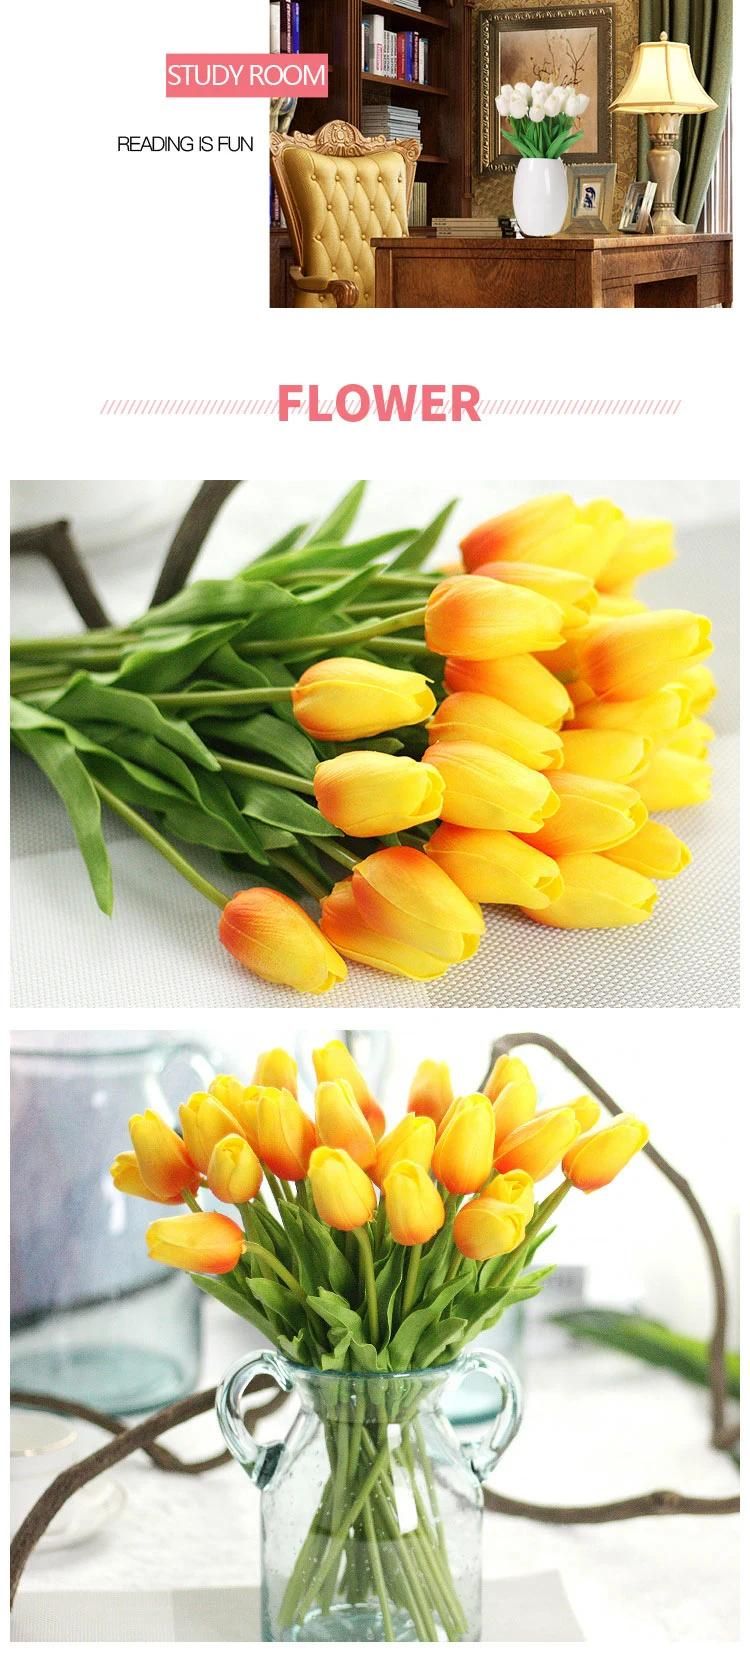 Artificial Tulip Flower Mini Real Touch Tulip Flowers Wedding Bouquet Home Decorations for Mother Wife Girlfriend